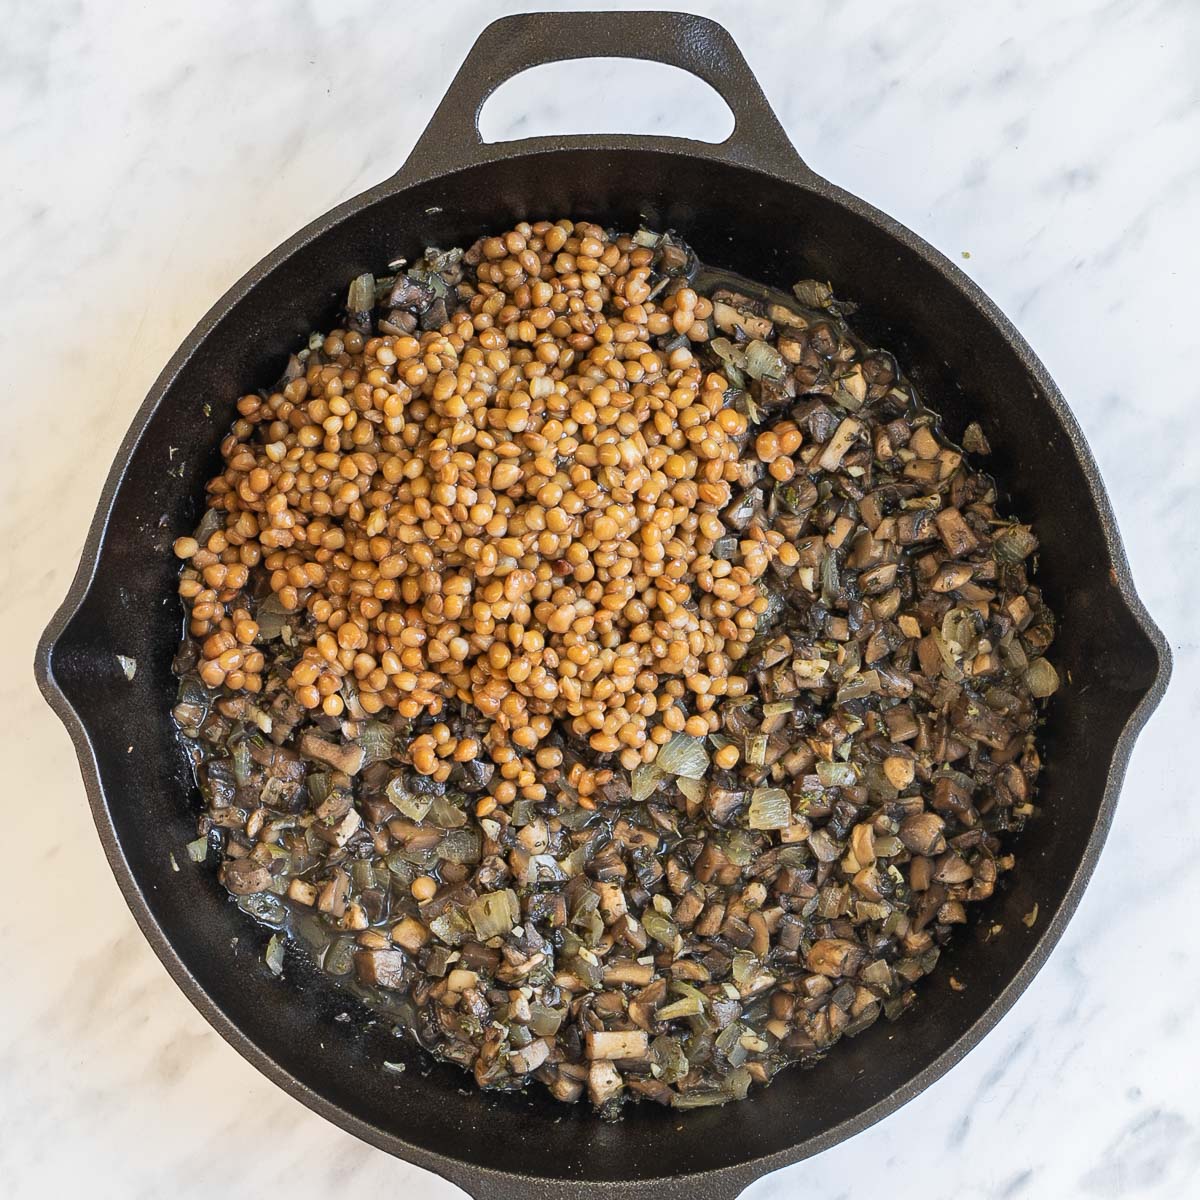 Cast iron skillet with sauteed chopped mushrooms and a heap of brown lentils.